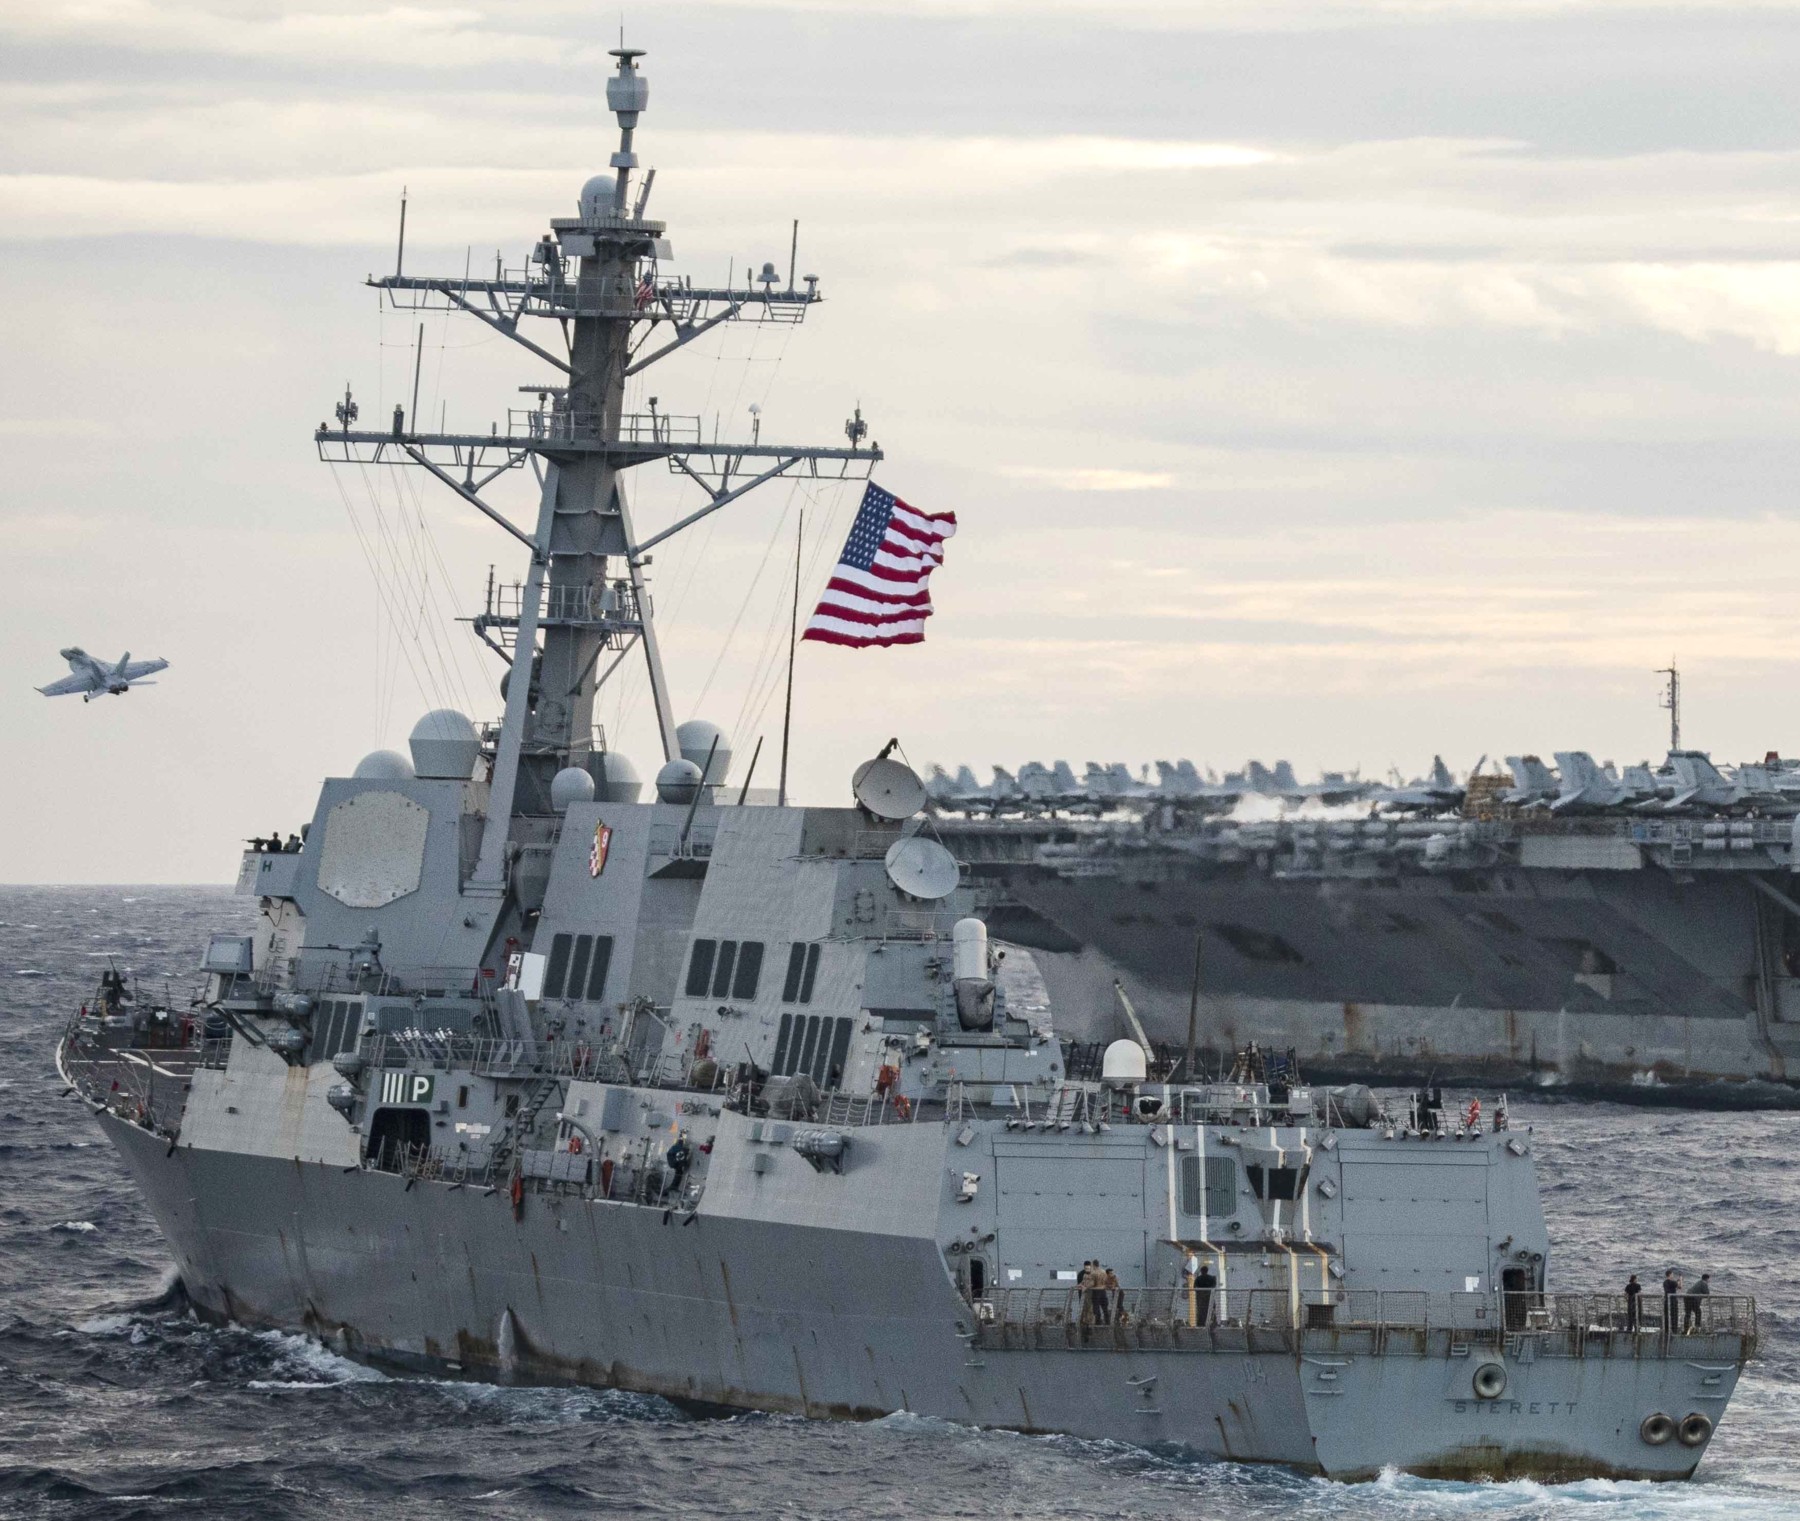 ddg-104 uss sterett arleigh burke class guided missile destroyer aegis us navy south china sea 81